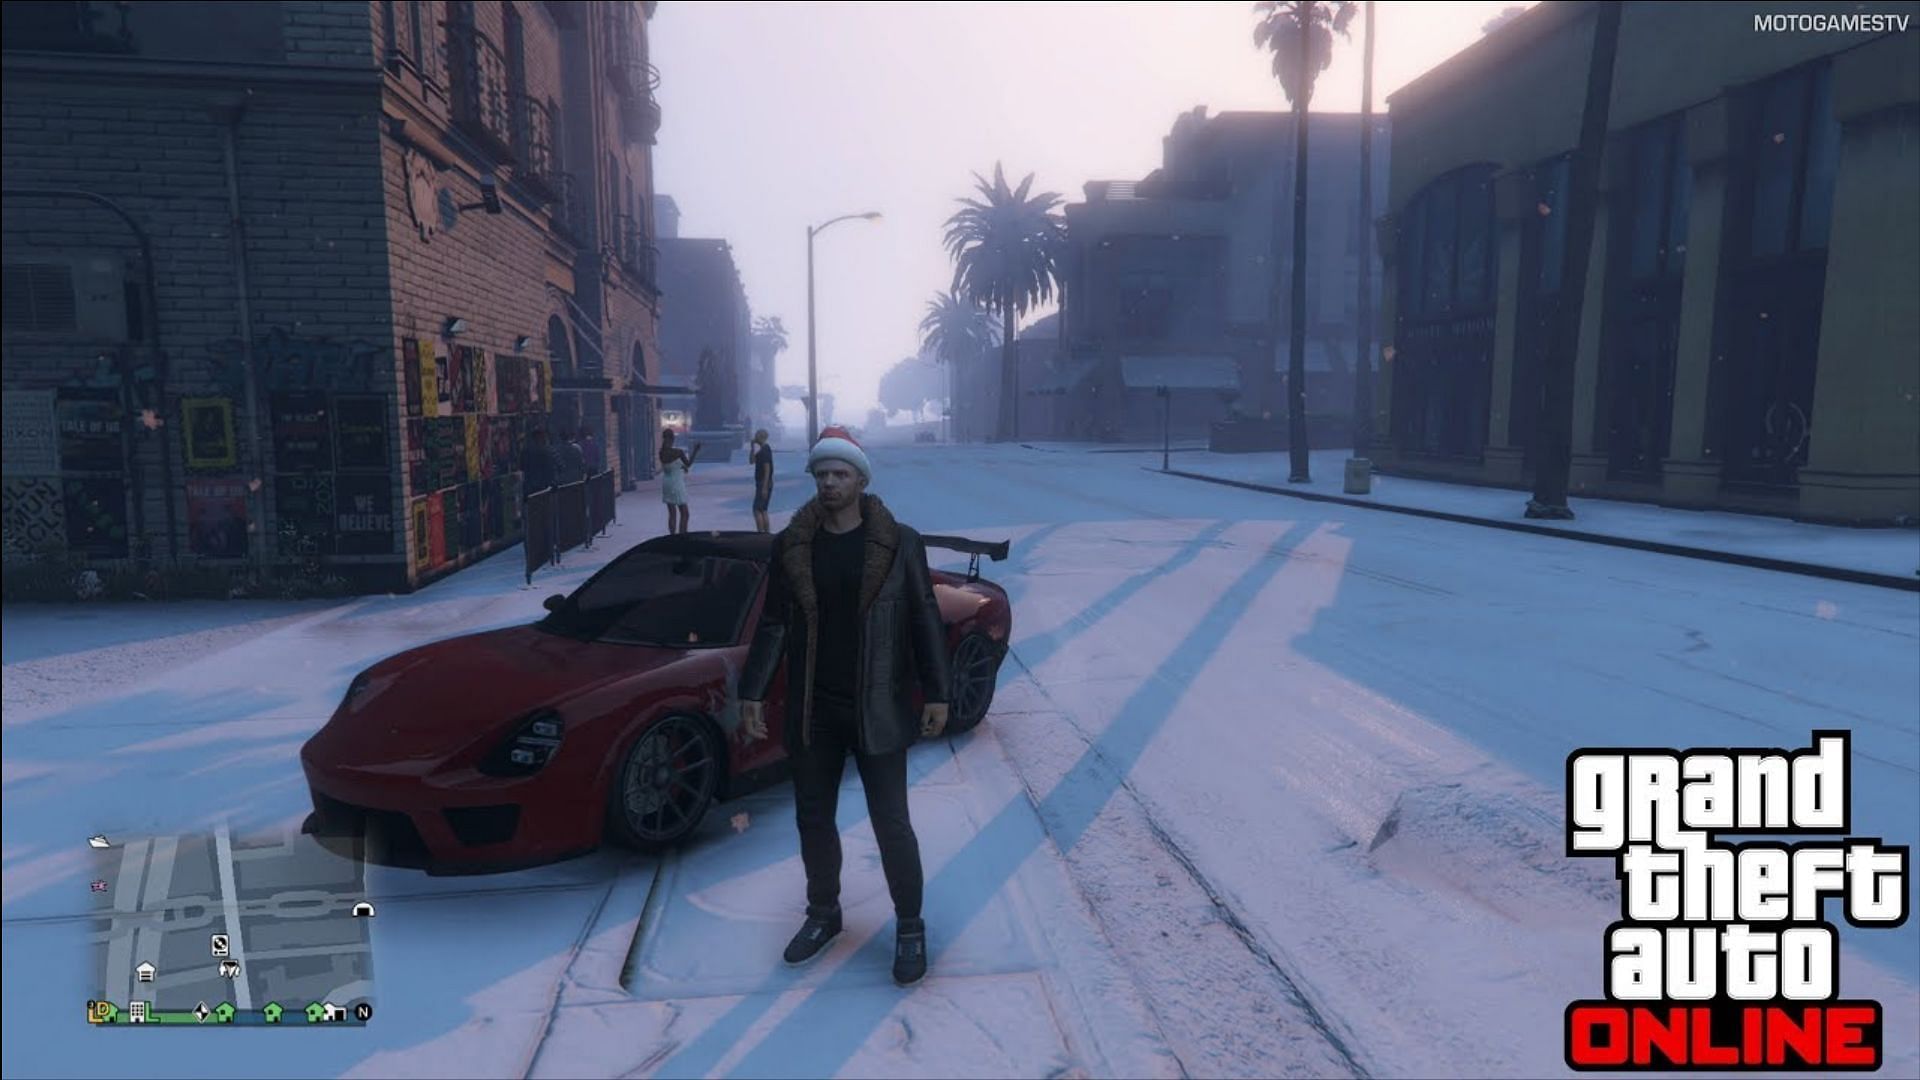 GTA Online is expected get the annual Snow update next week. (Image via YouTube/MotoGamesTV)